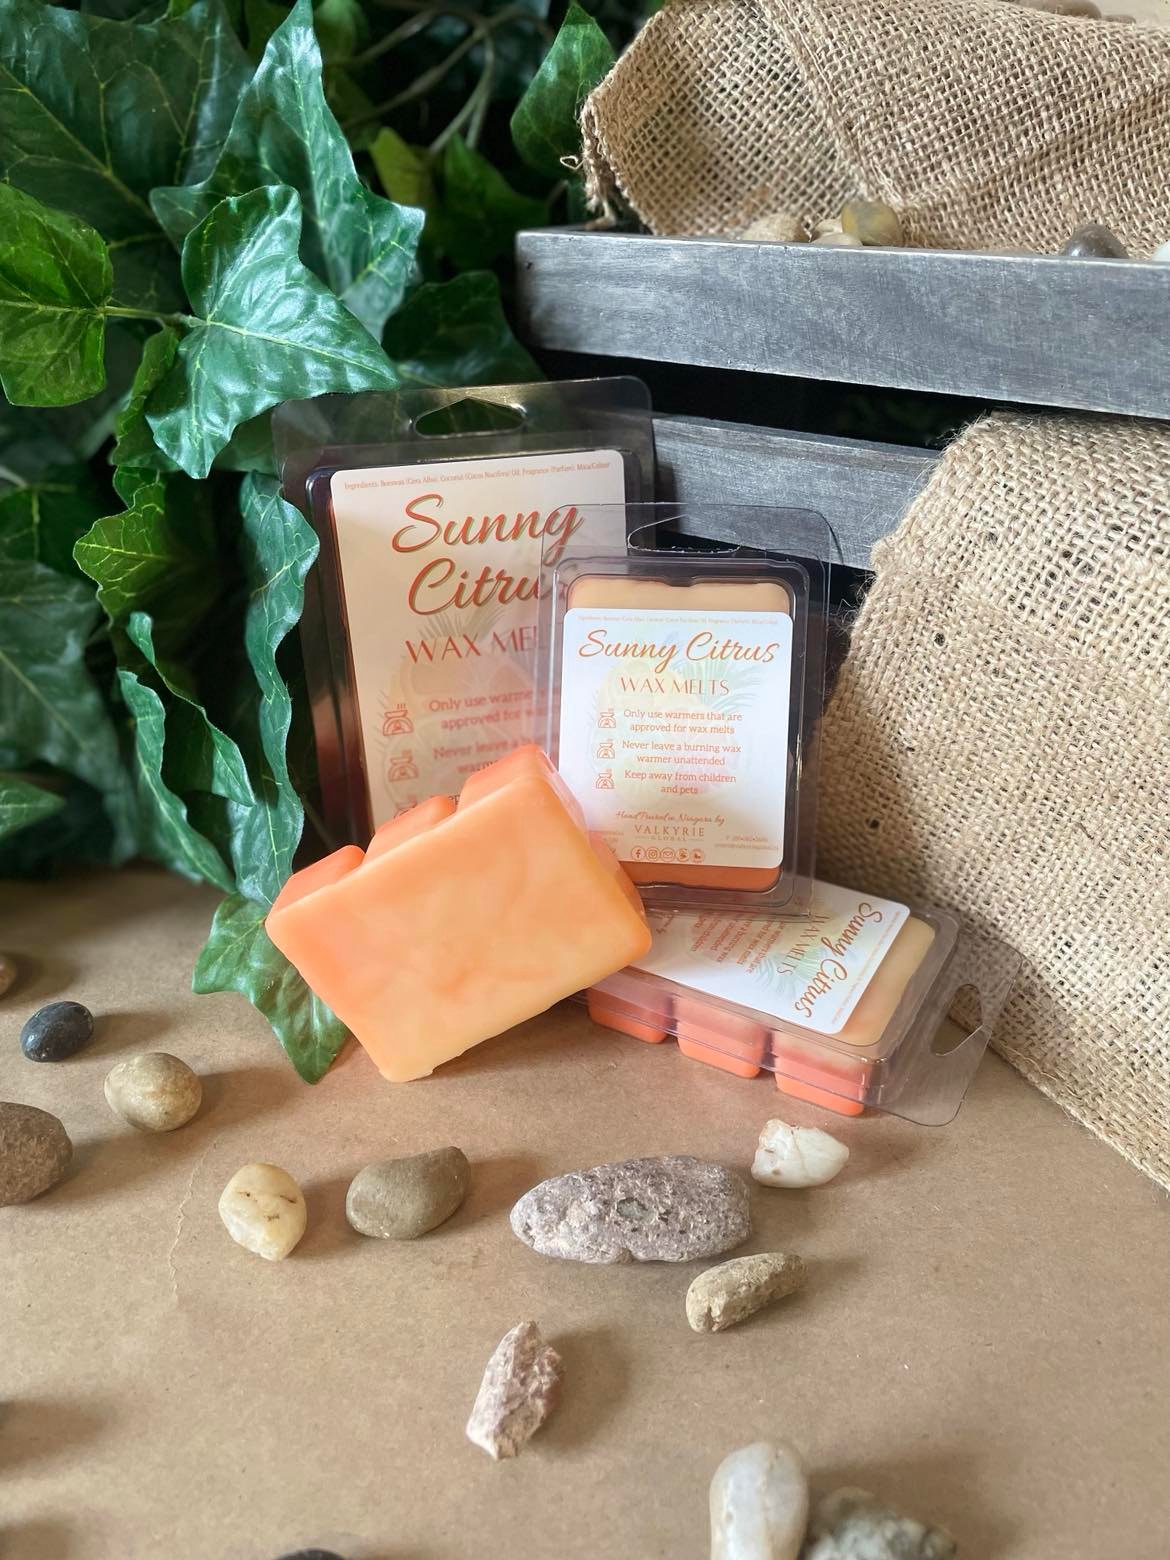 Sunny Citrus Wax Melts Valkyrie Global Natural Skin Care Self Care Beauty St. Catharines Ontario Canada